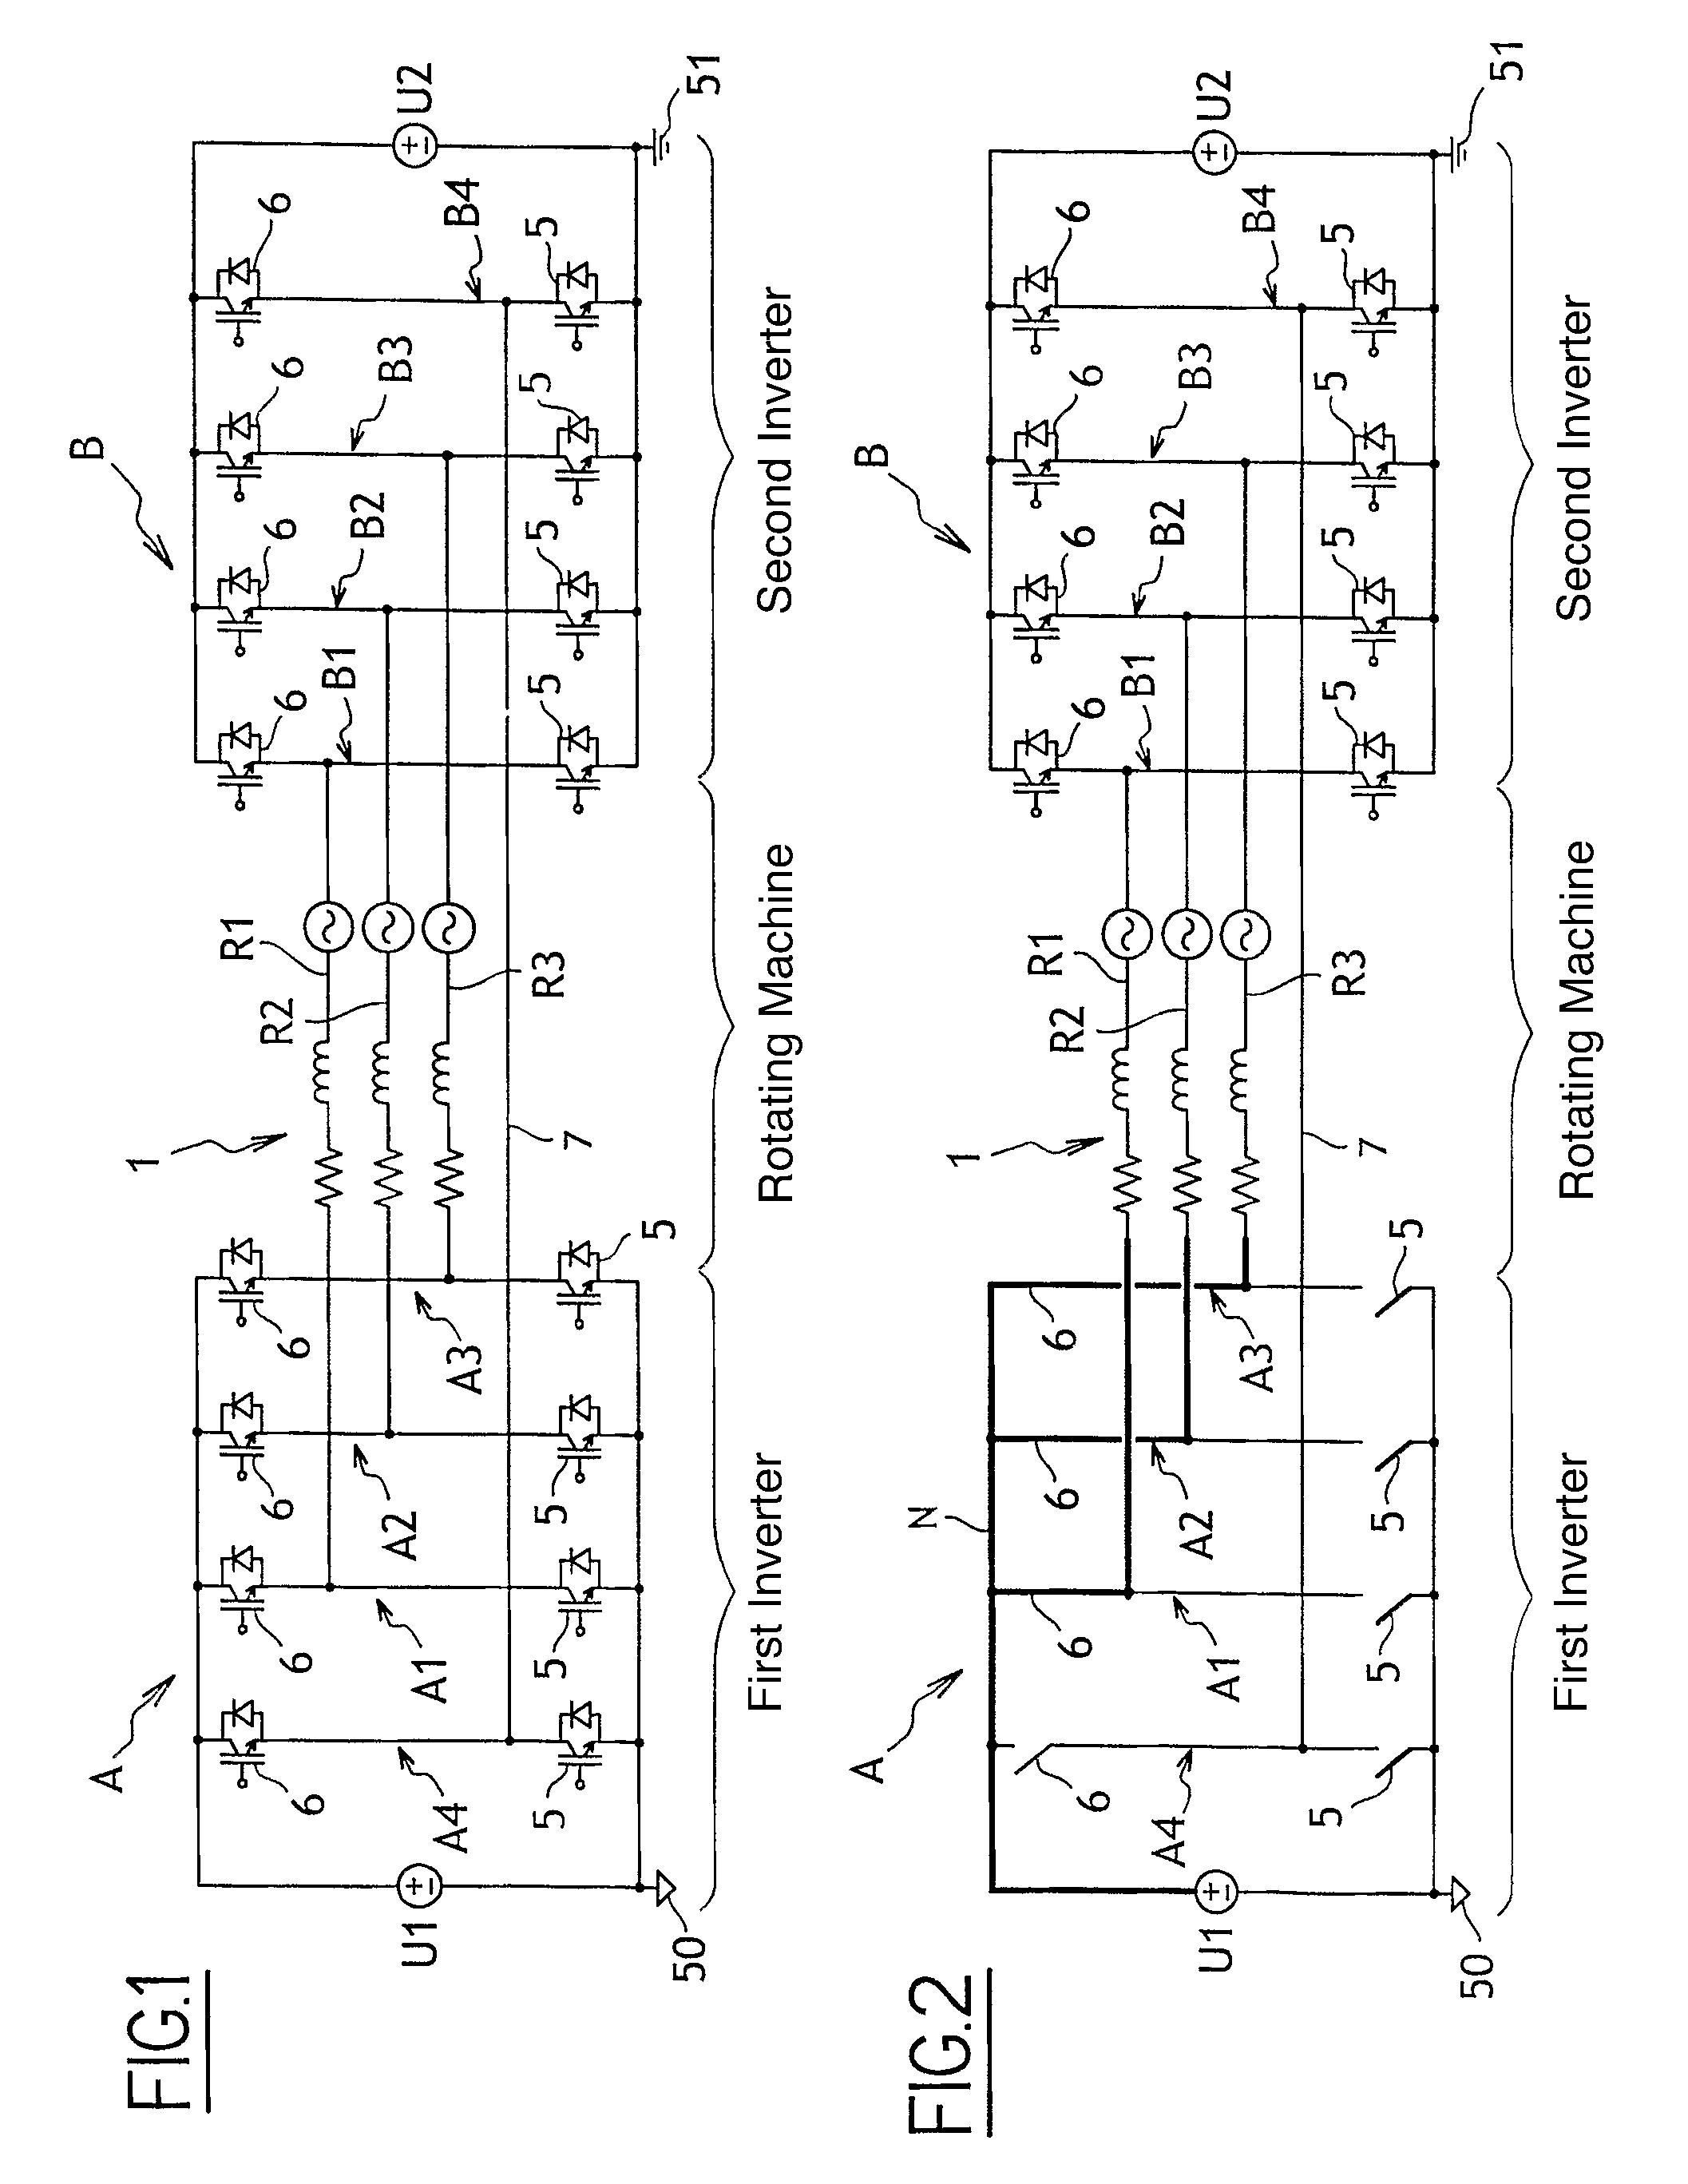 Power supply with two series inverters for a polyphase electromechanical actuator